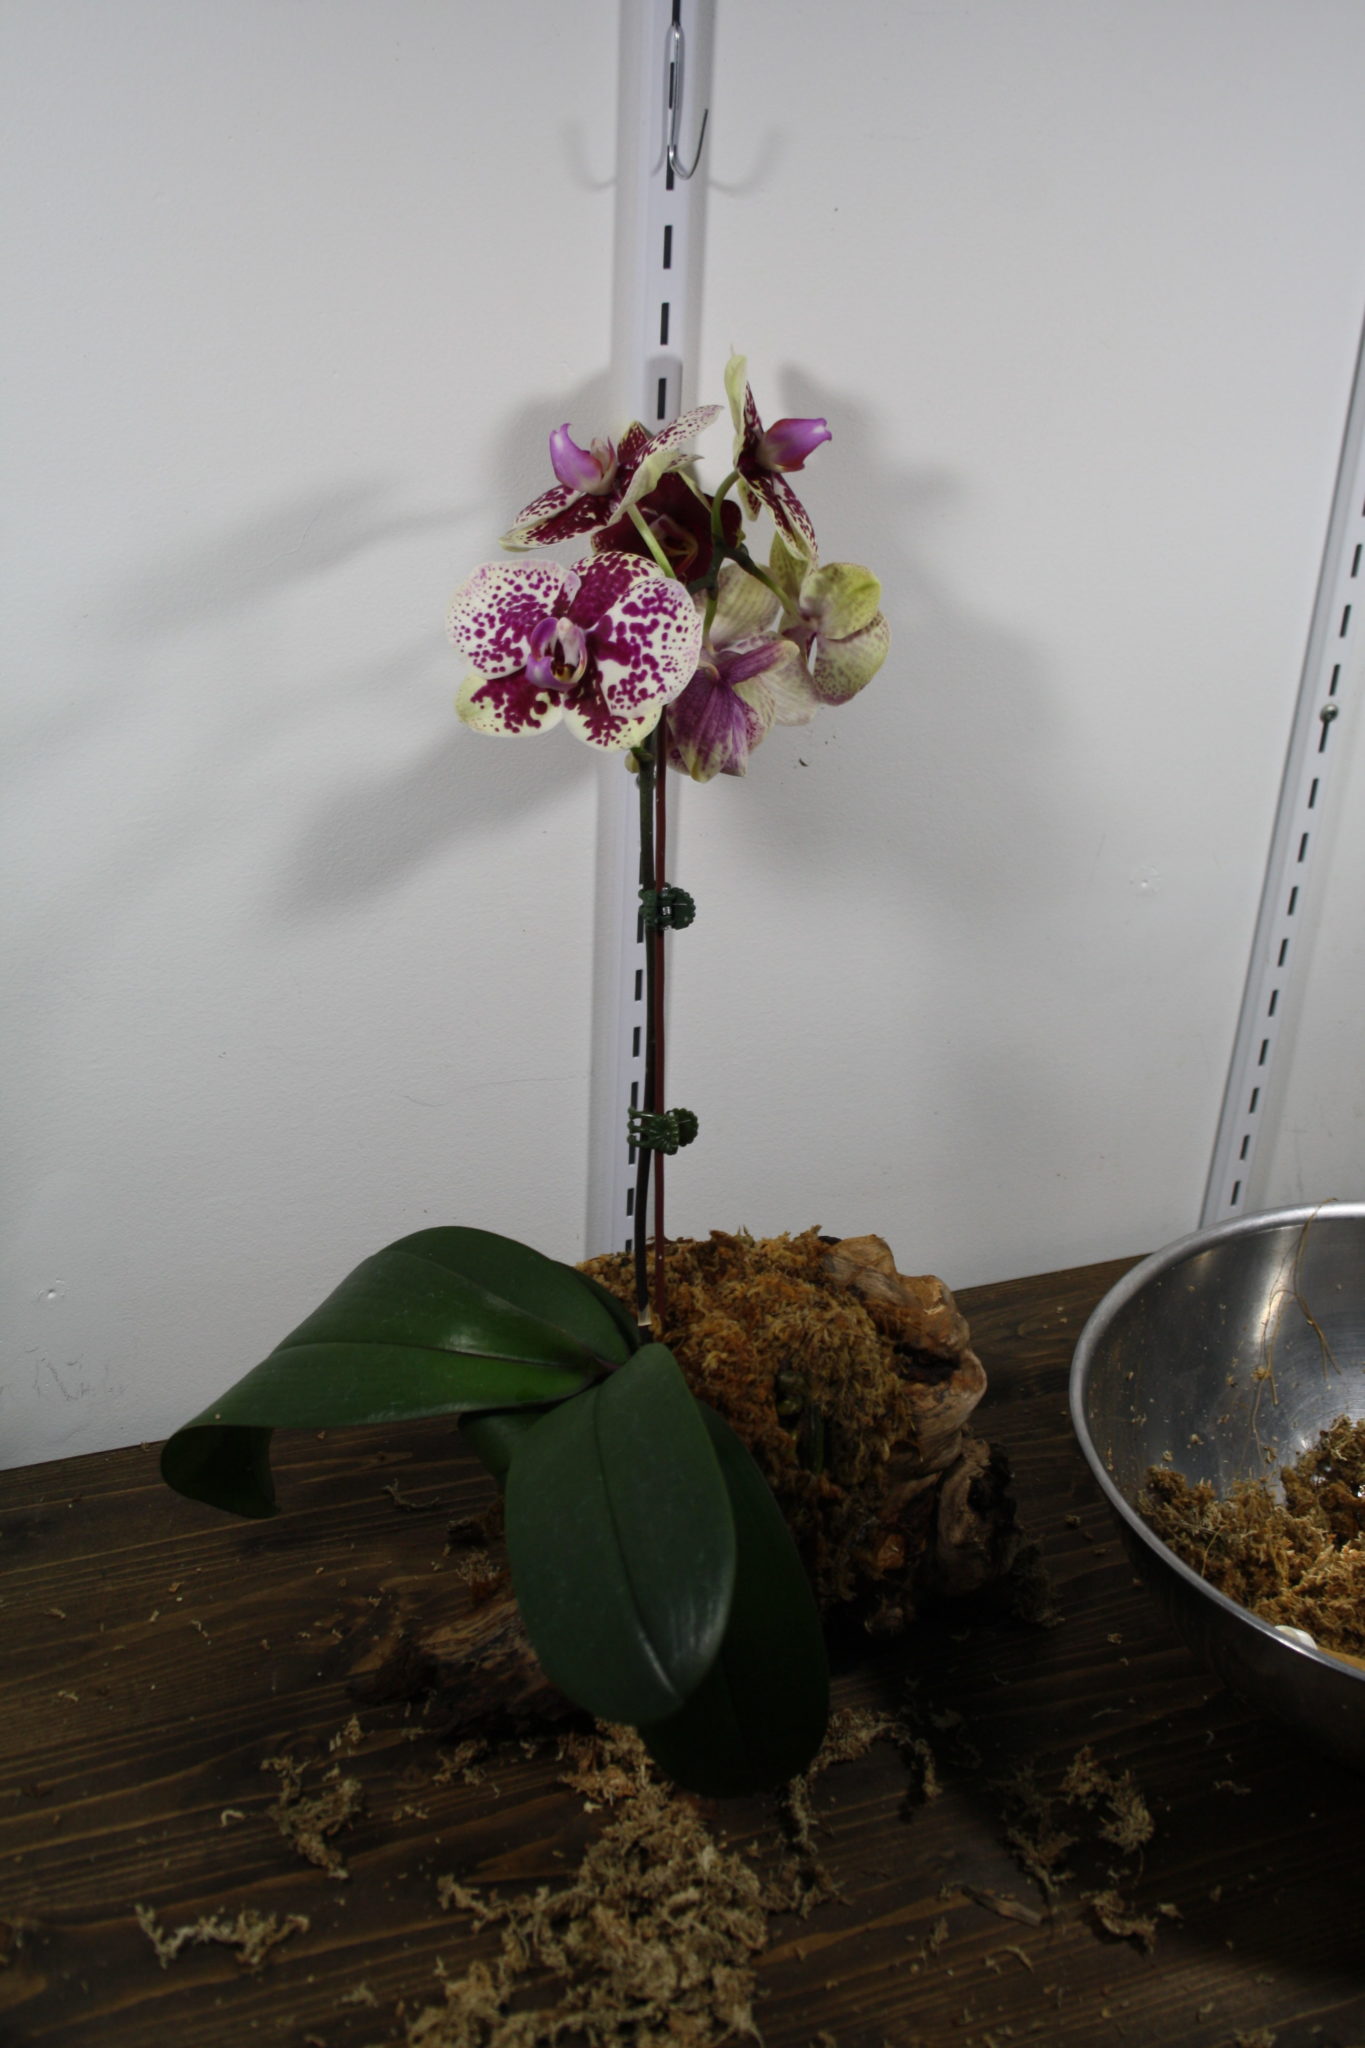 how to mount an orchid